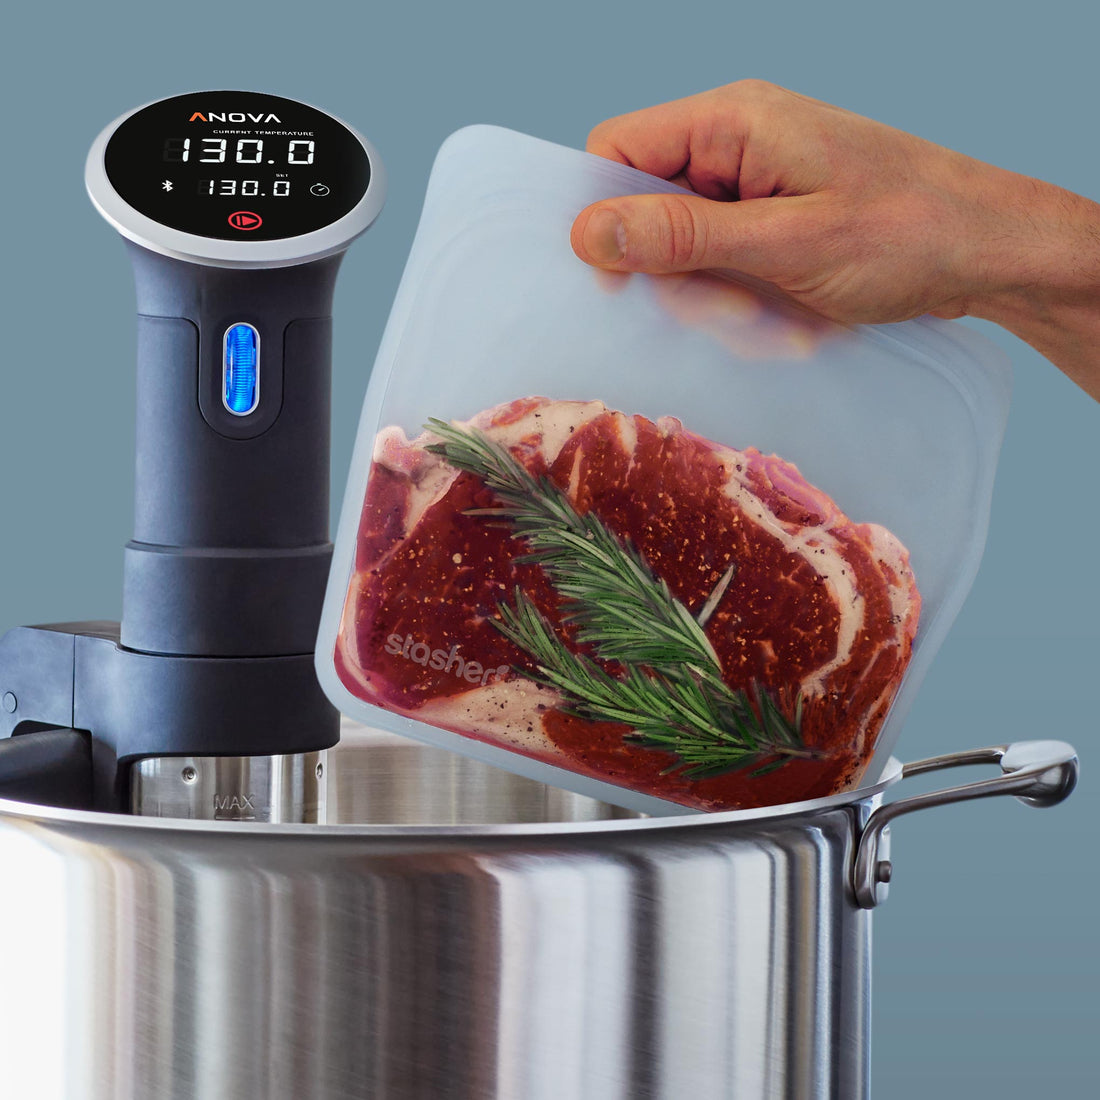 Anova Launches New Reusable Silicone Bag As An Alternative To Single-use  Plastic Bags In Sous Vide Cooking